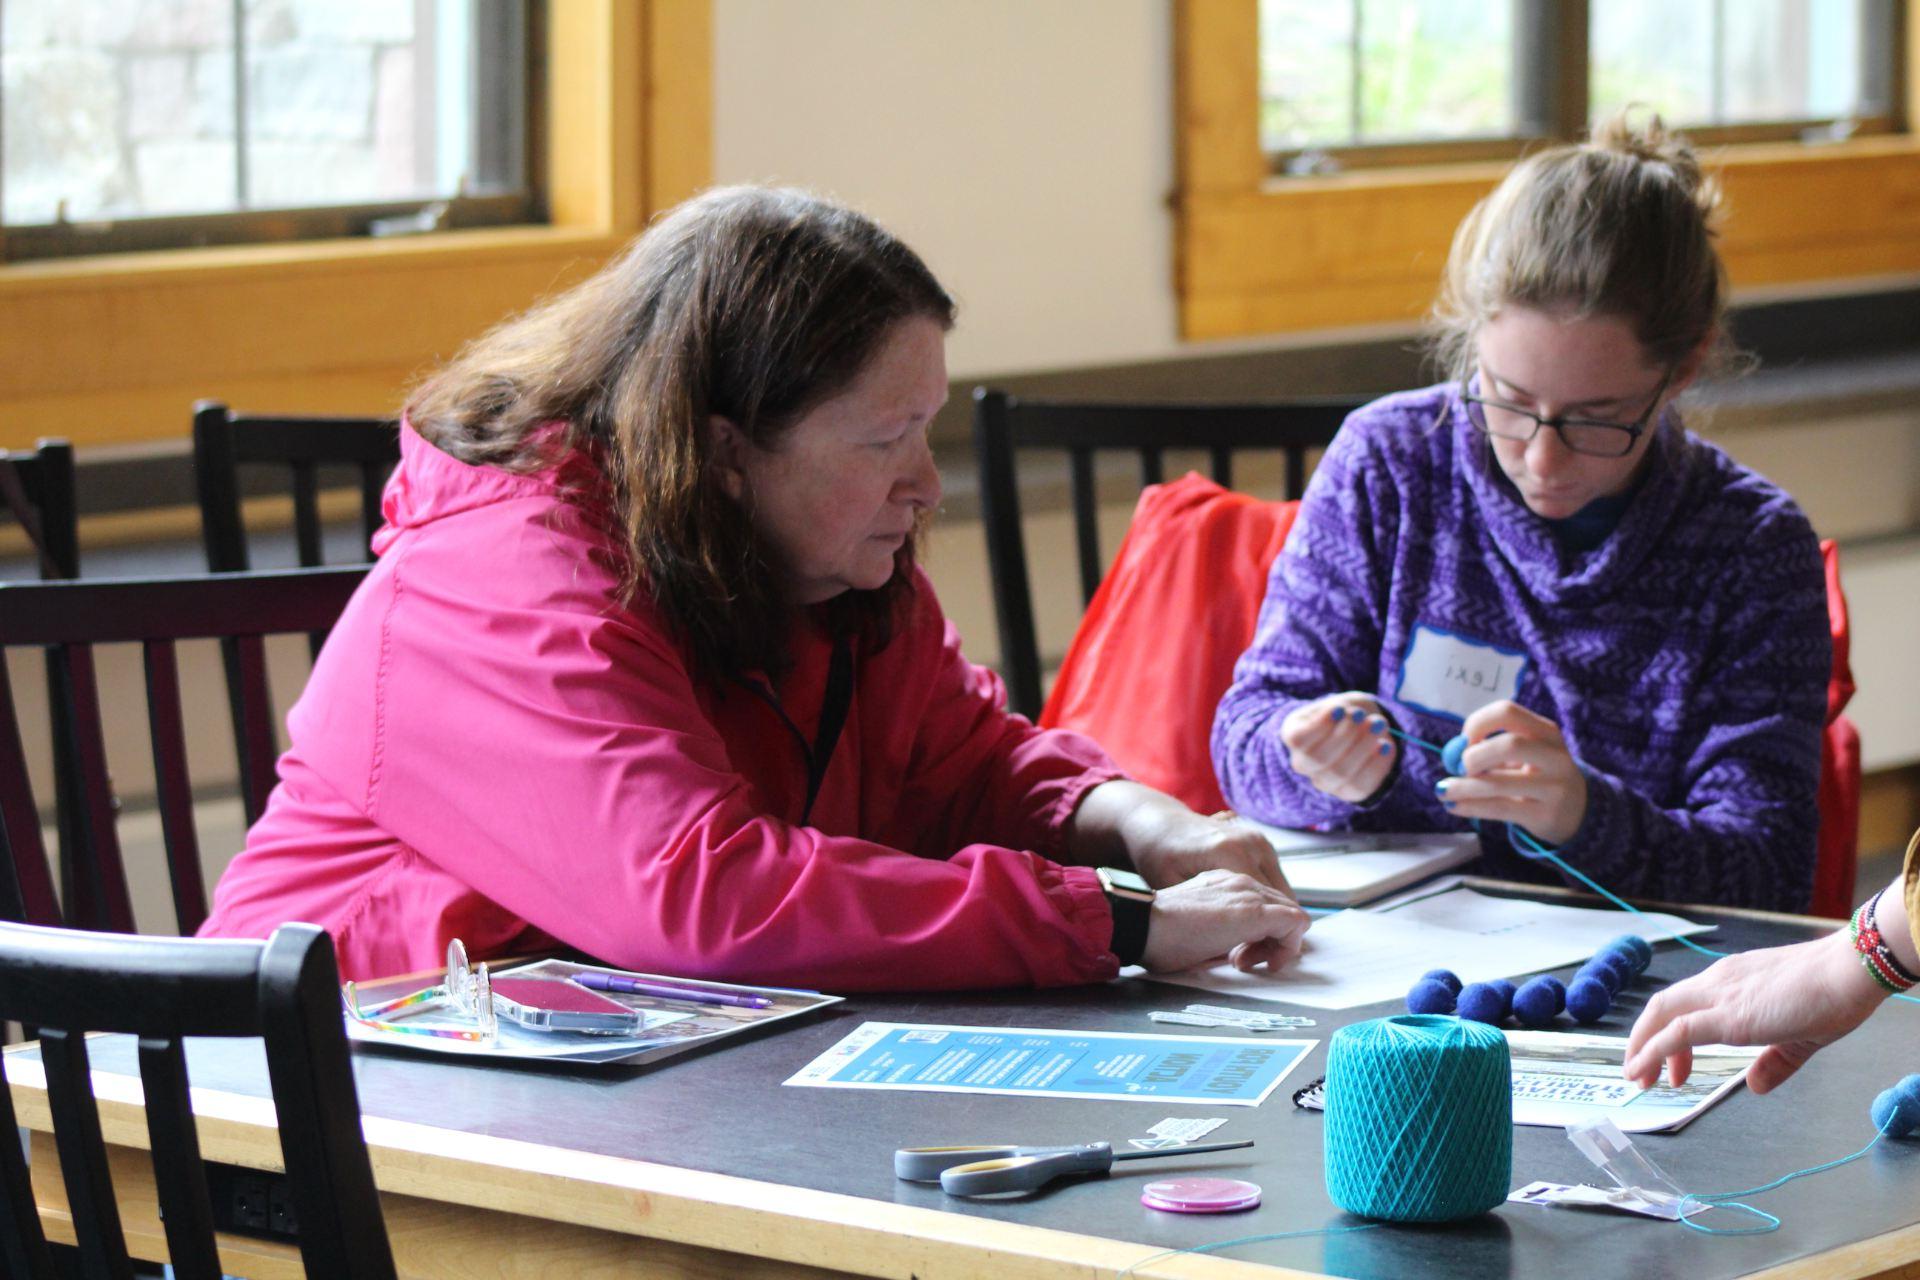 Participants engaged in a fiber arts workshop at The Wild Center. Photo courtesy of Paul Smith’s College.